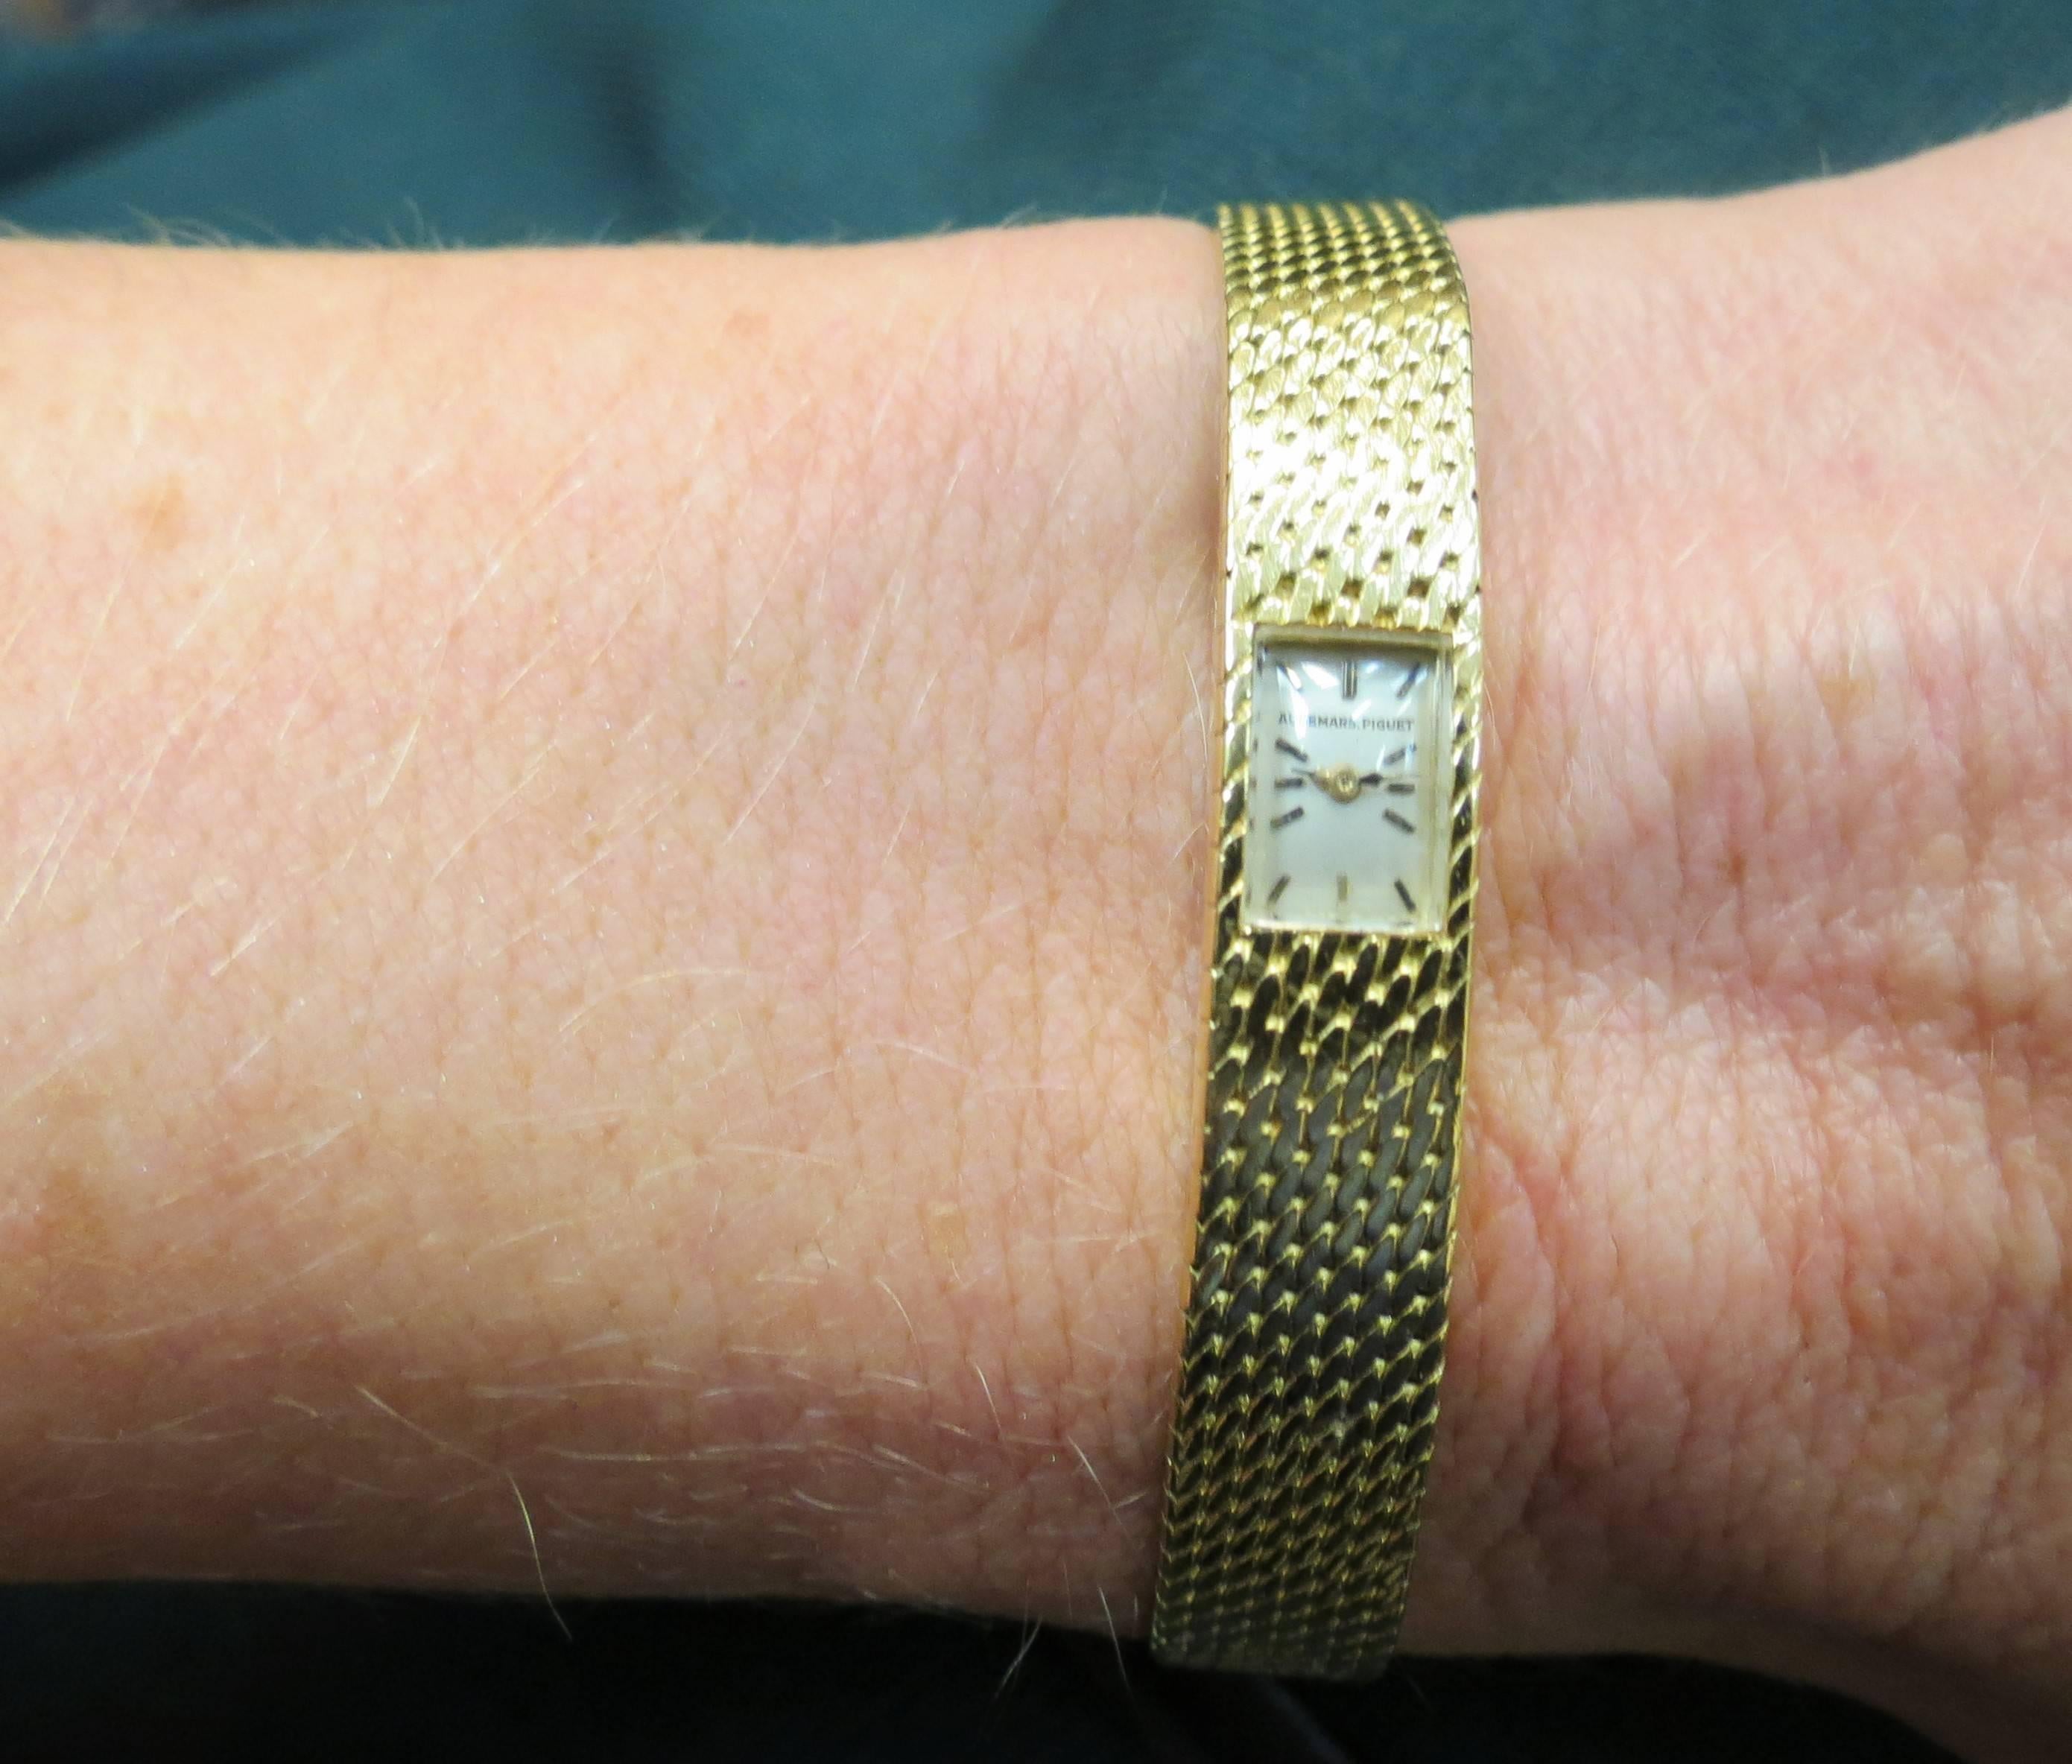 Ladies Audemar Piquet 18K yellow gold, mechanical movement, backwind, stick markers, mesh bracelet watch, excellent condition.
Considered to be one of the smallest watches ever made
Length of bracelet 6.25 inches
Width of bracelet .25